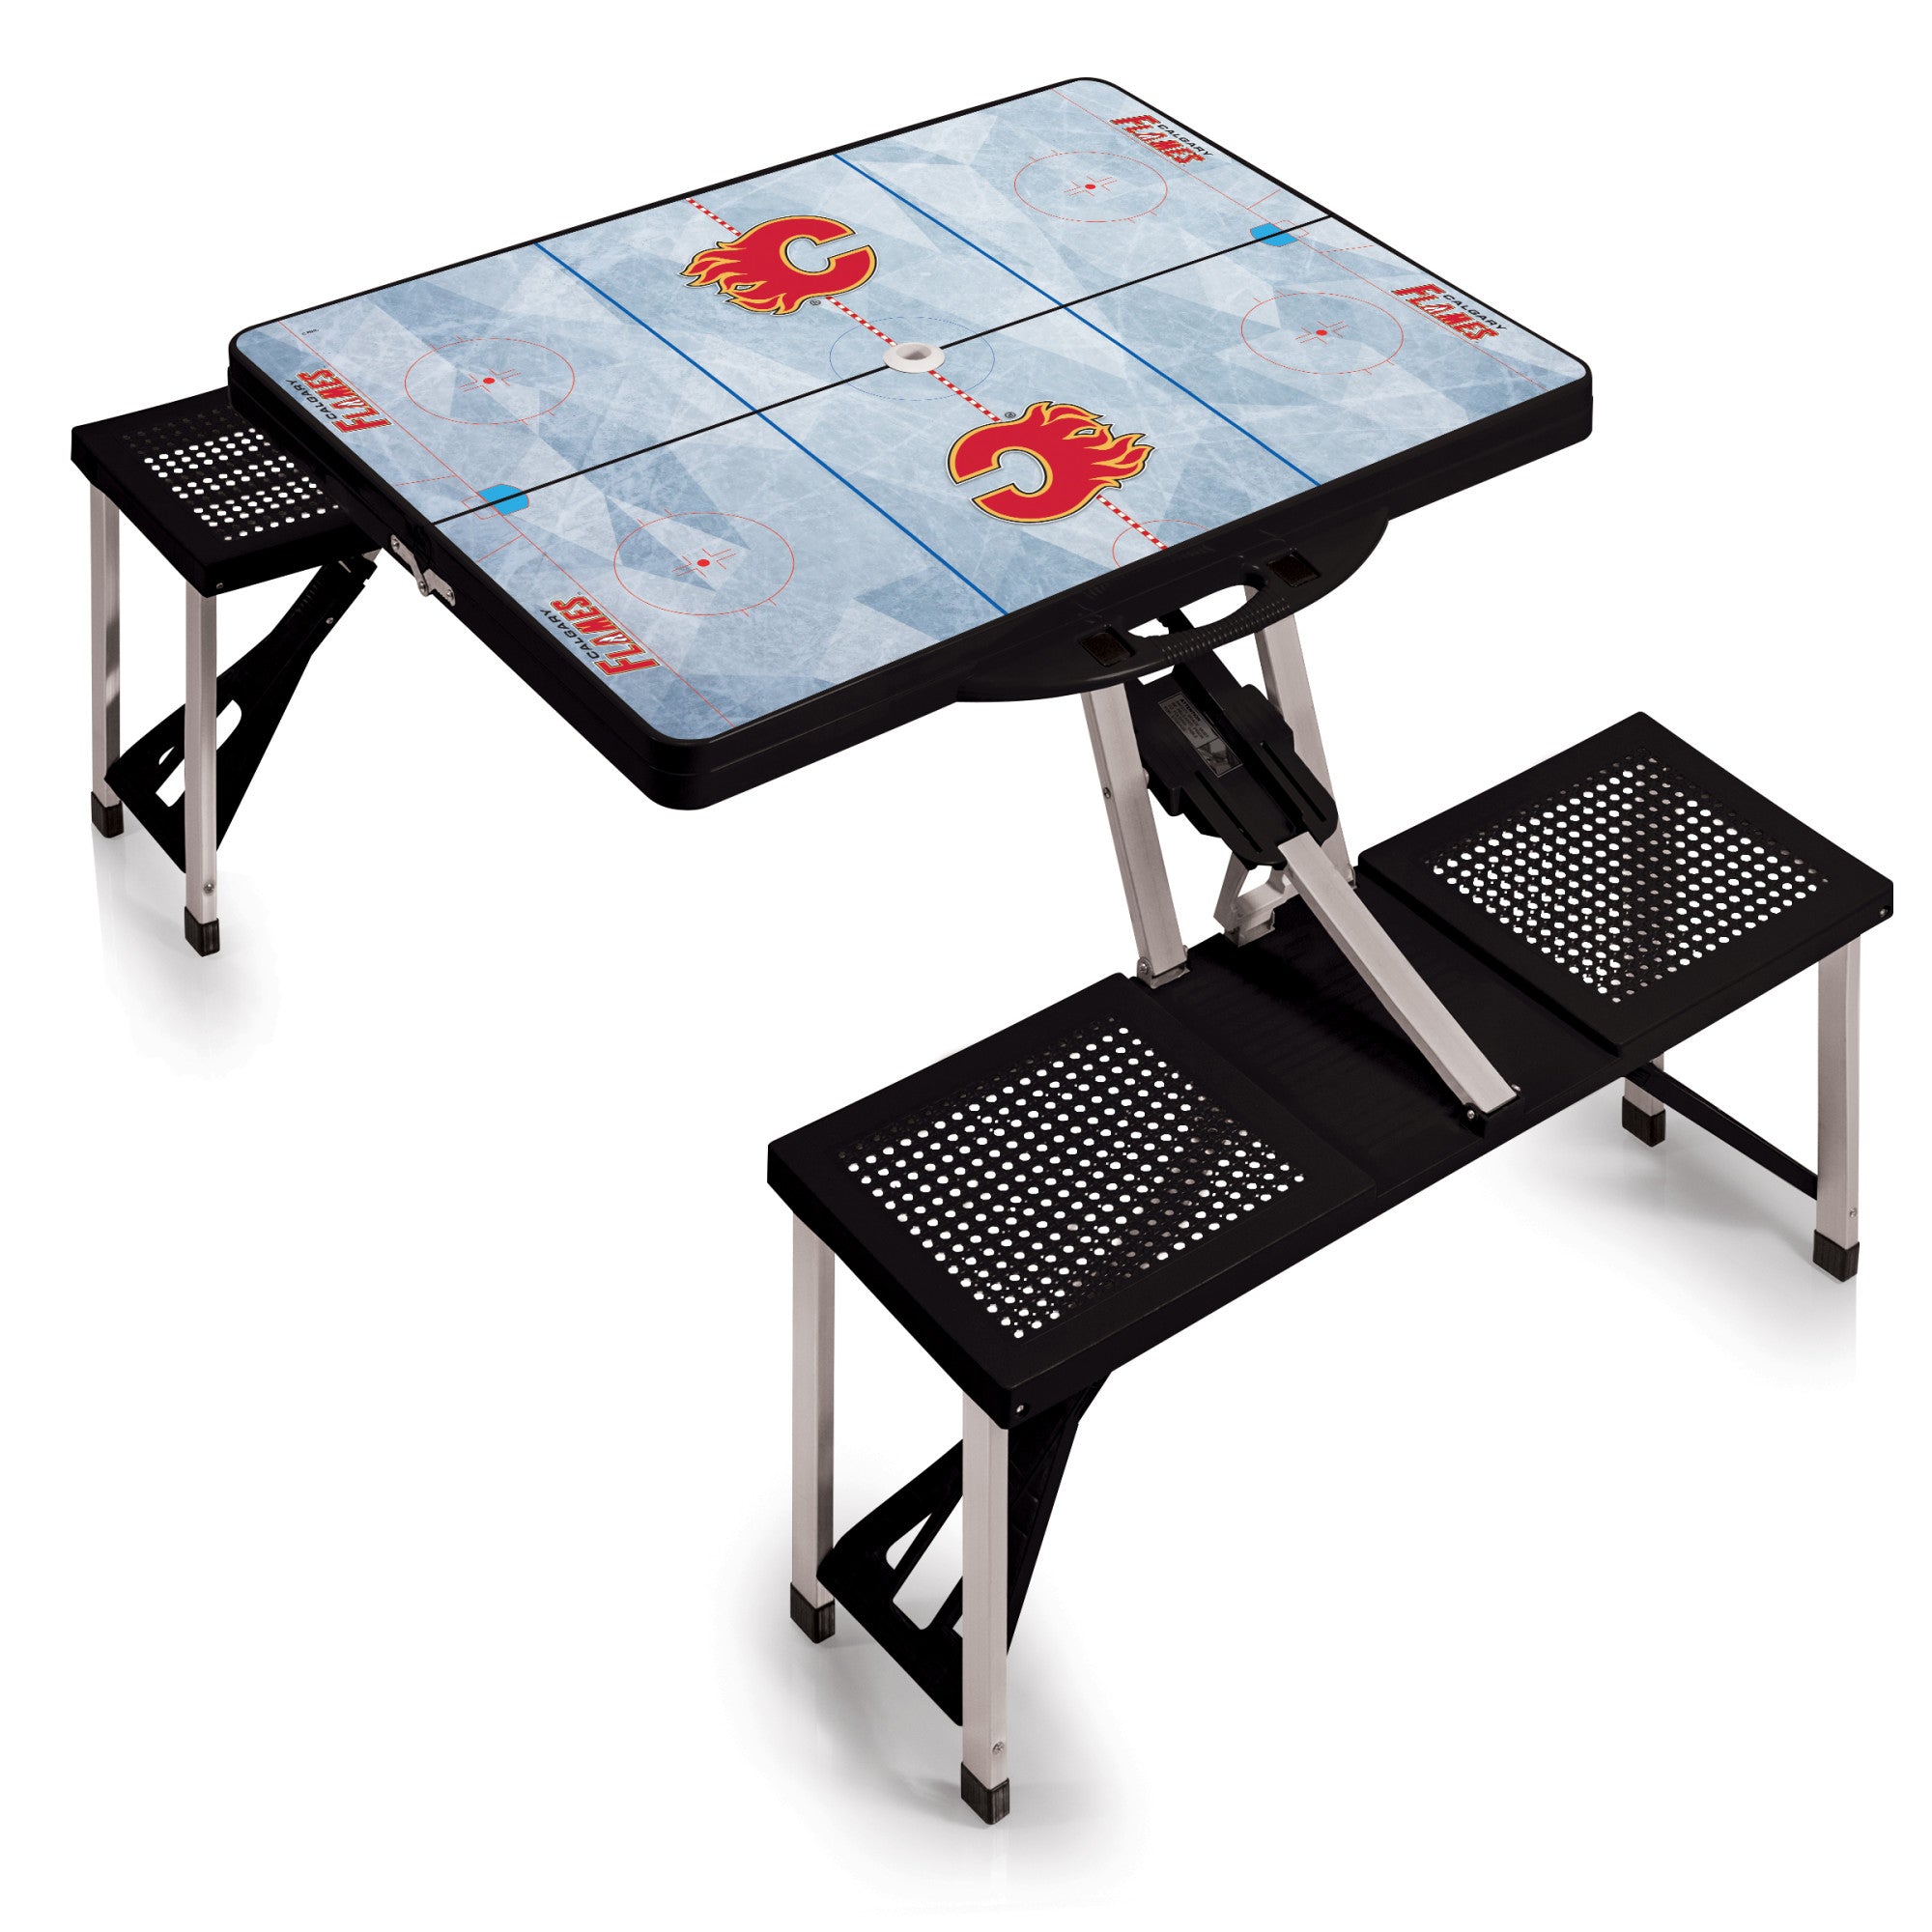 Calgary Flames - Picnic Table Portable Folding Table with Seats